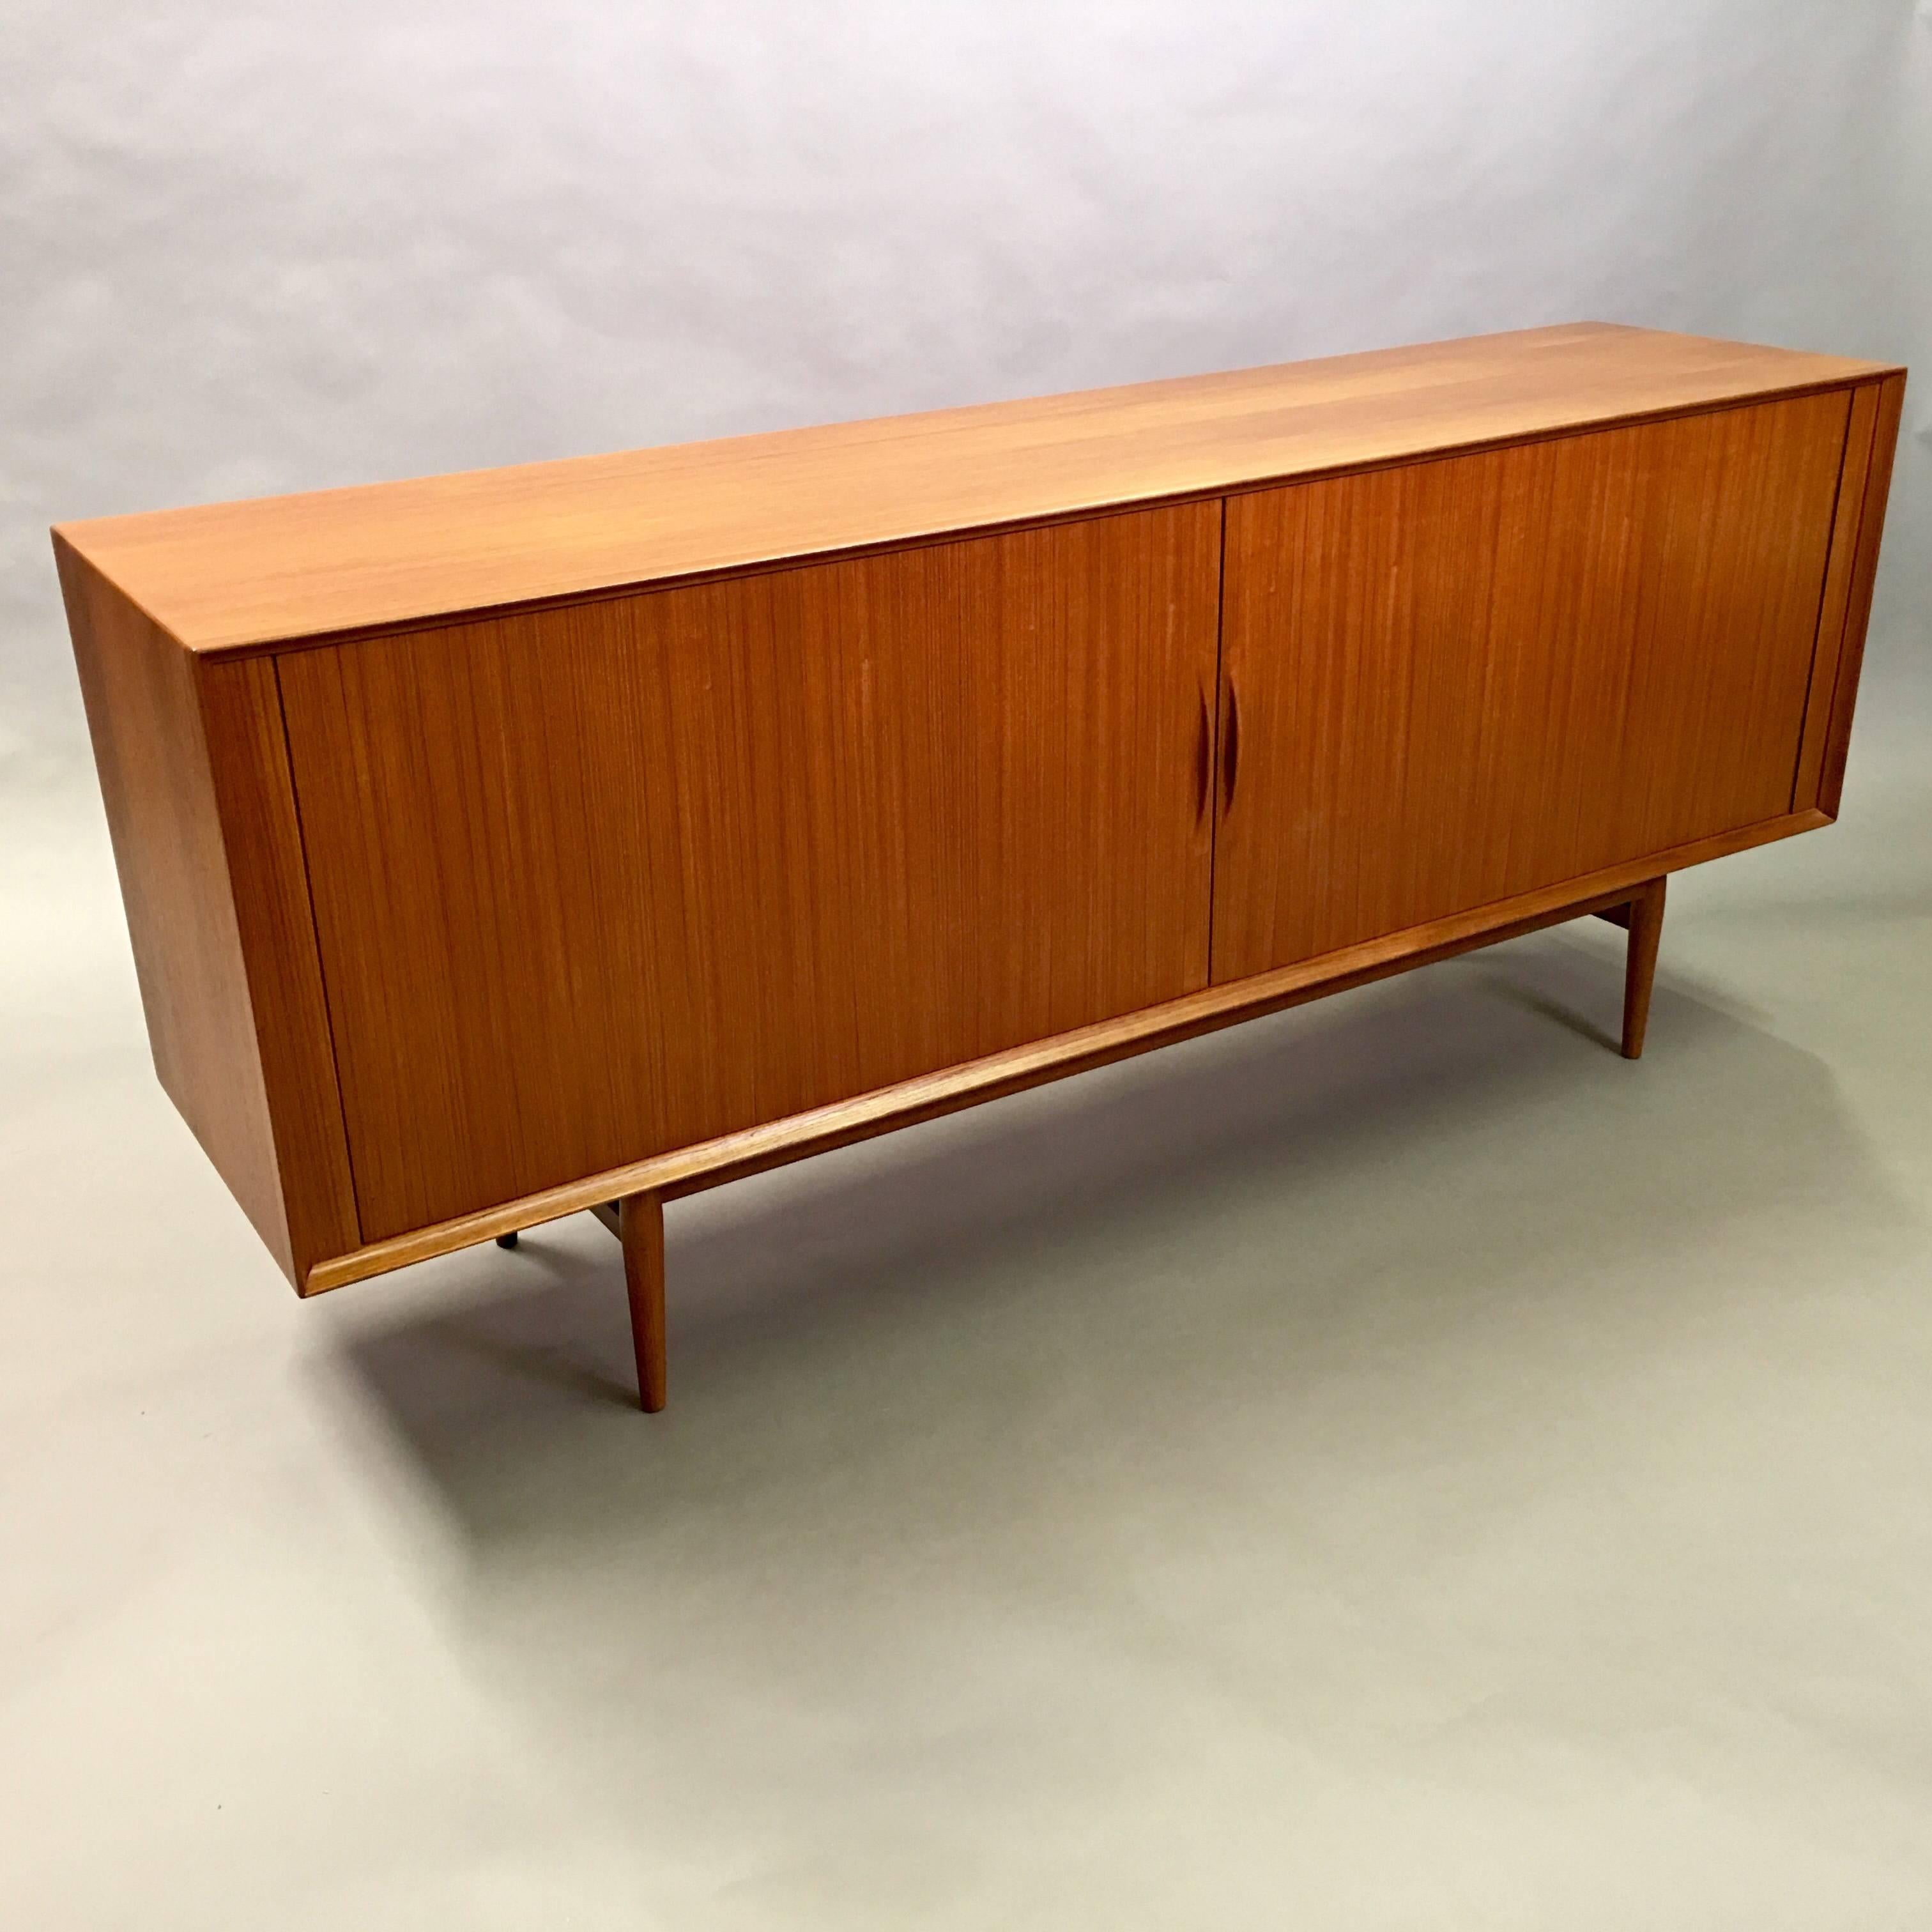 Minimal, Danish Modern, teak credenza by Arne Vodder for Sibast features a tambour front that slides open to reveal adjustable shelves and three drawers.